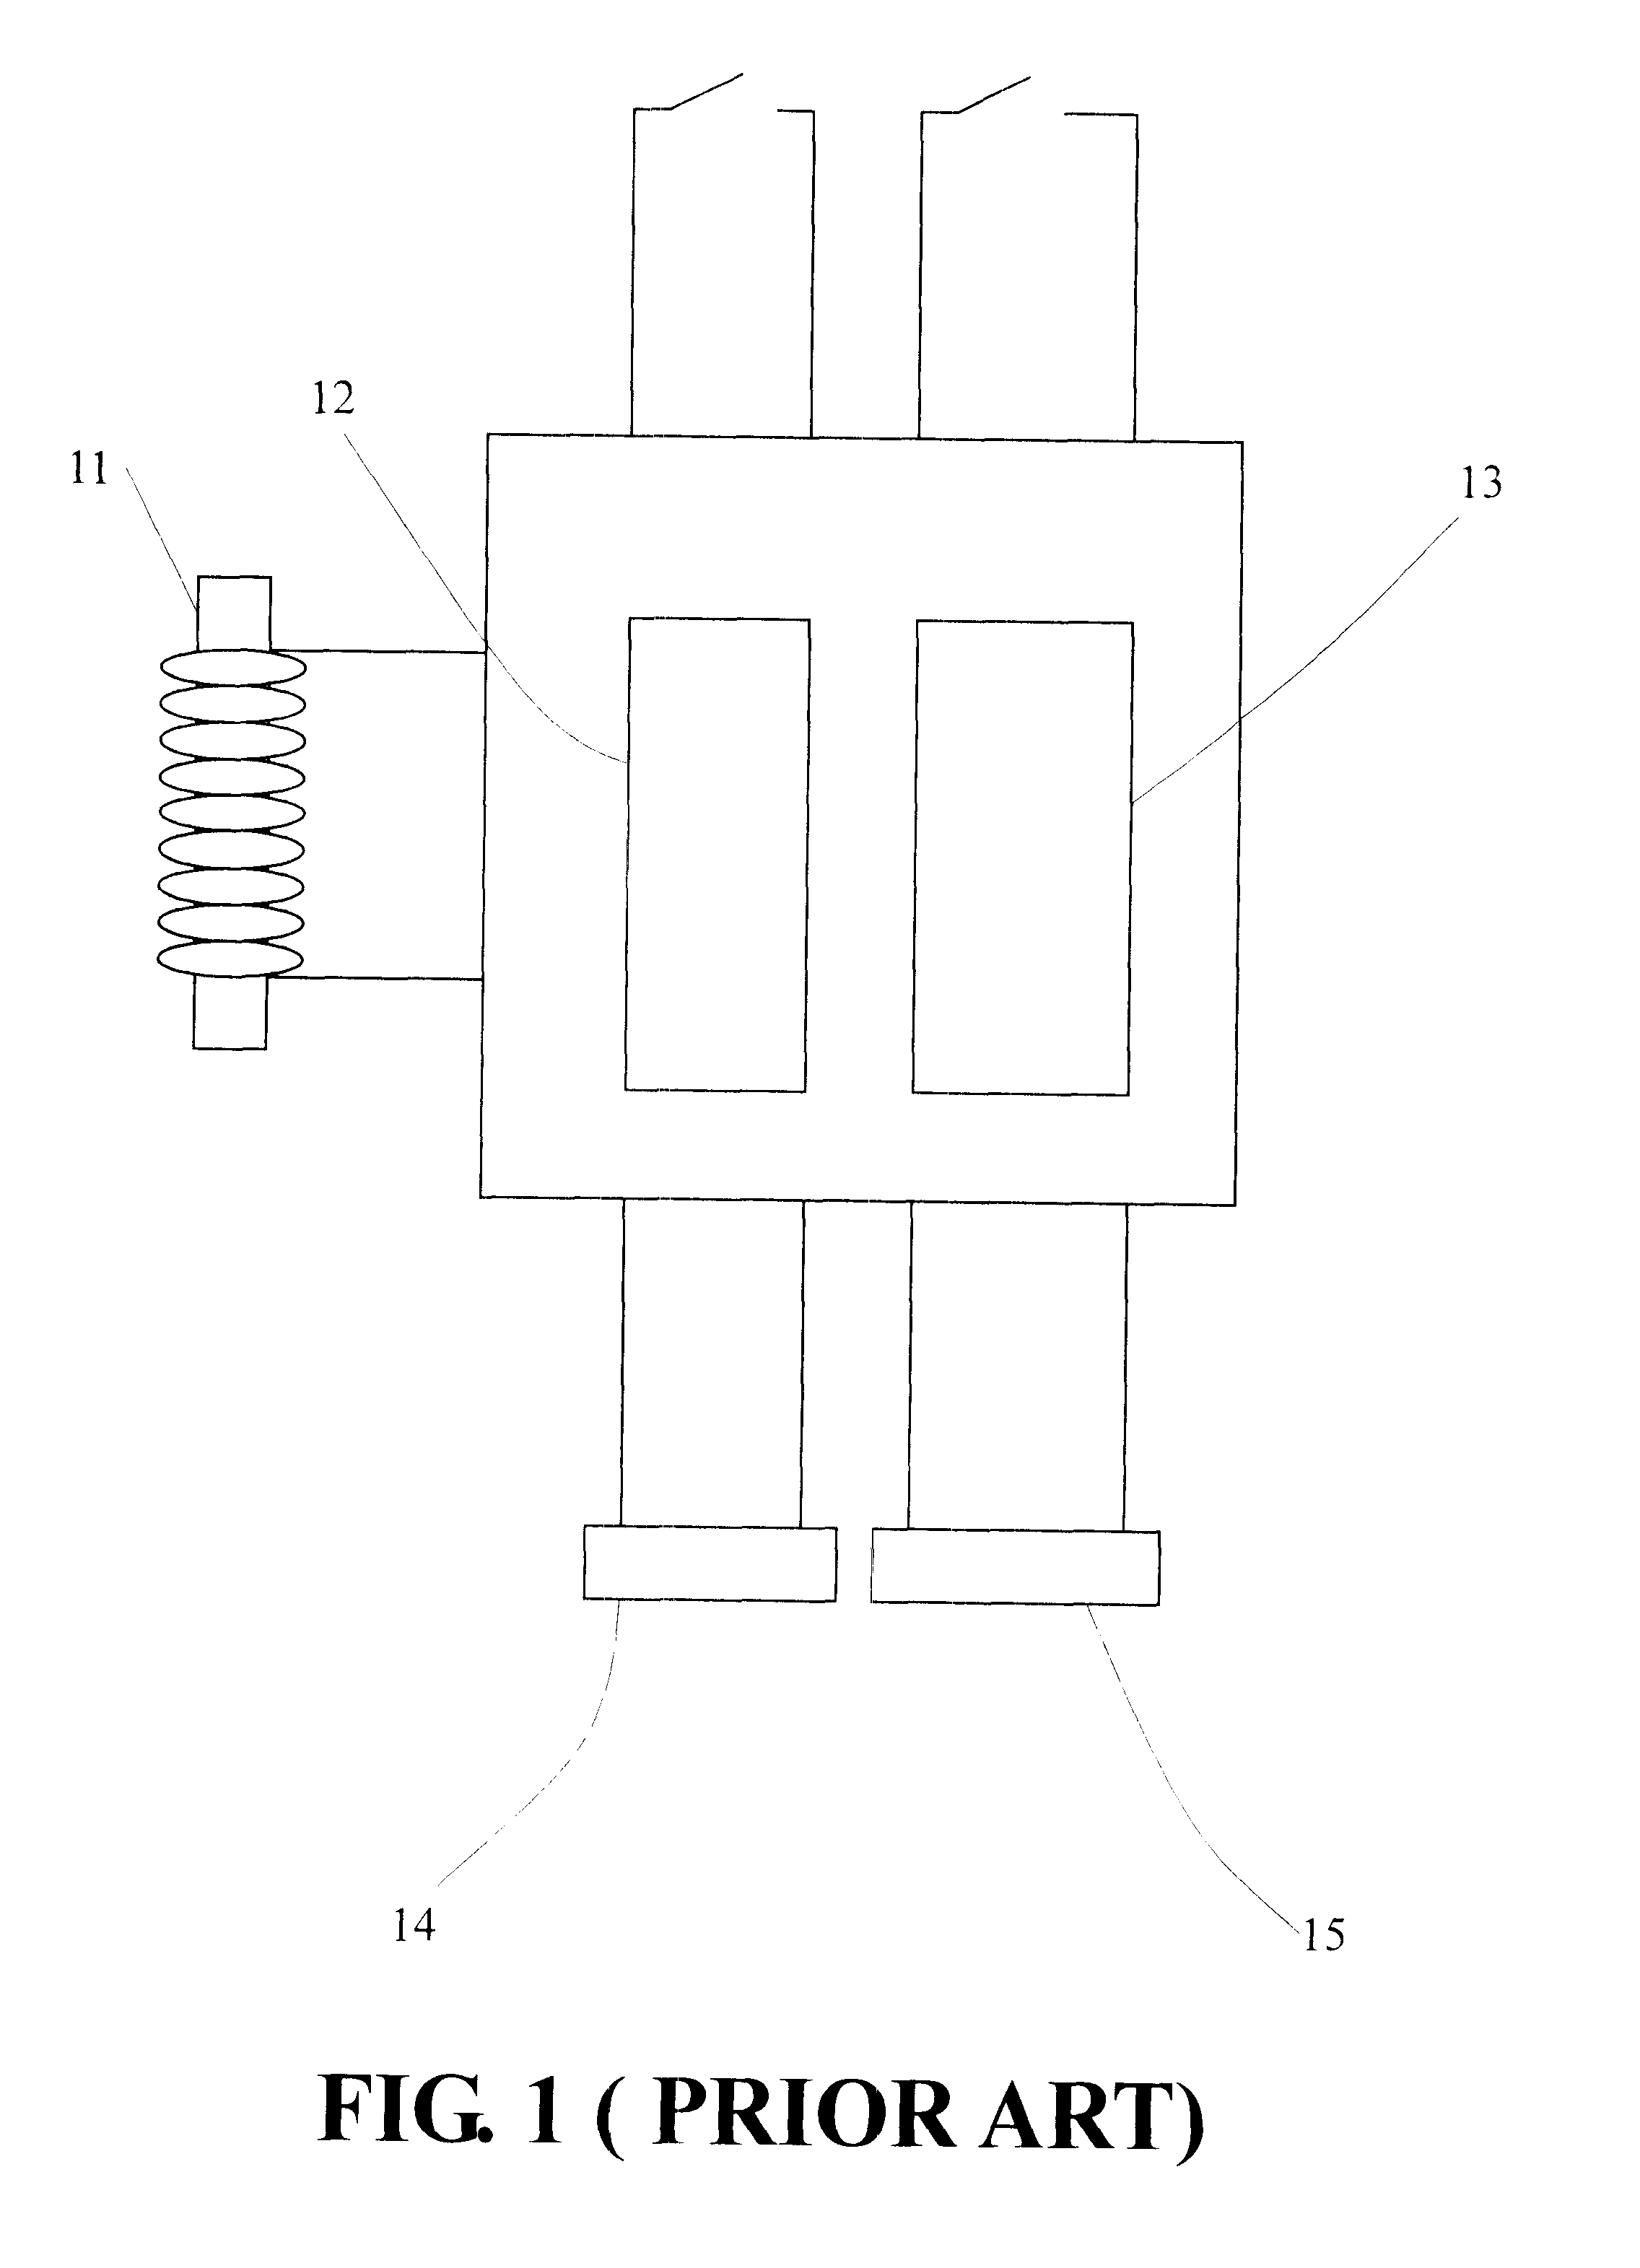 Method for timing a clock